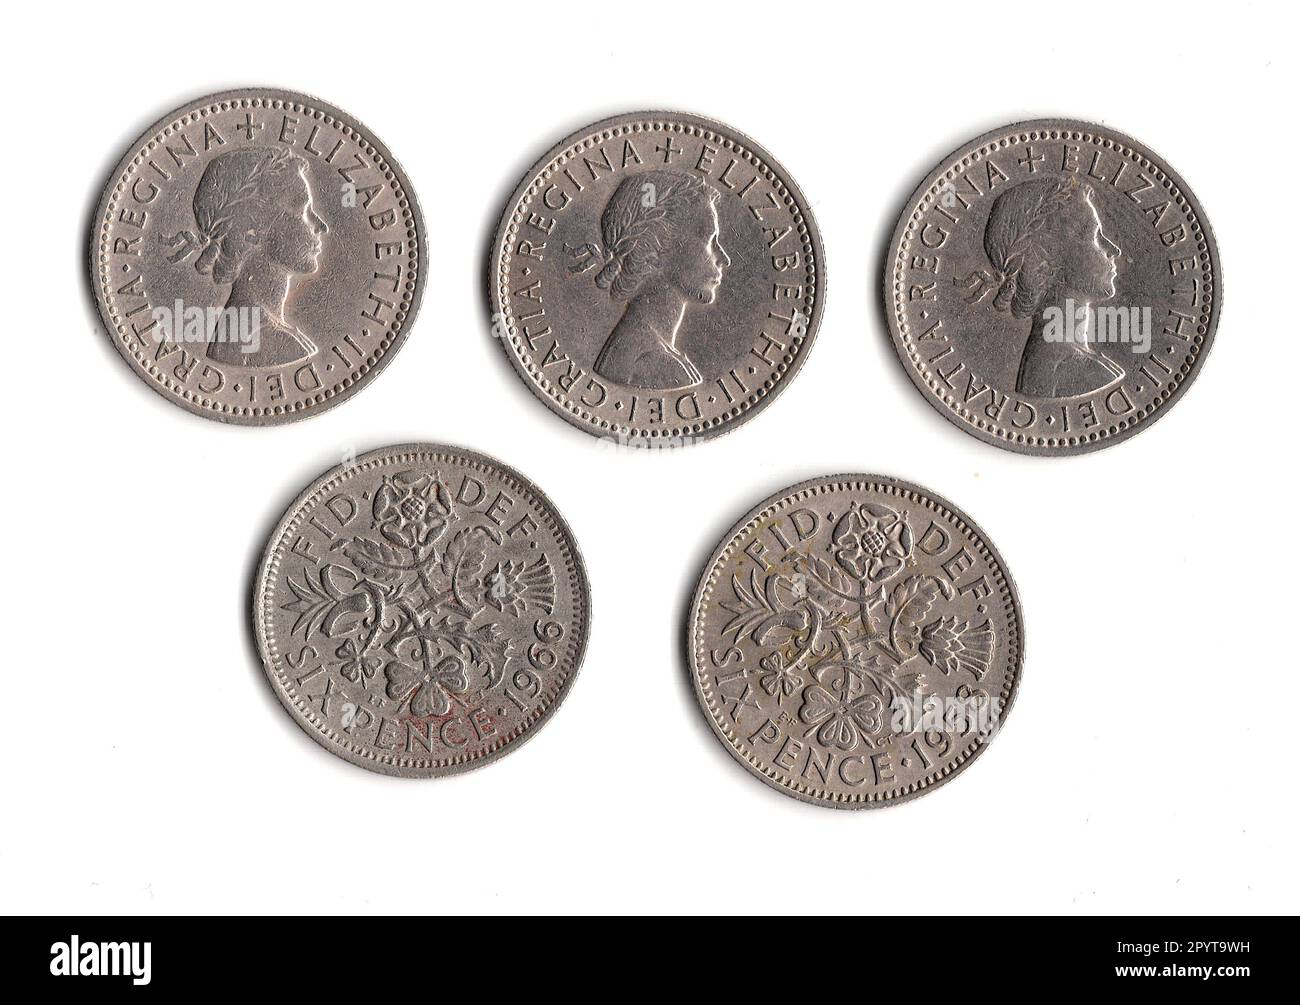 Queen Elizabeth II vintage six pence pieces from Great Britain showing the front and reverse. Stock Photo